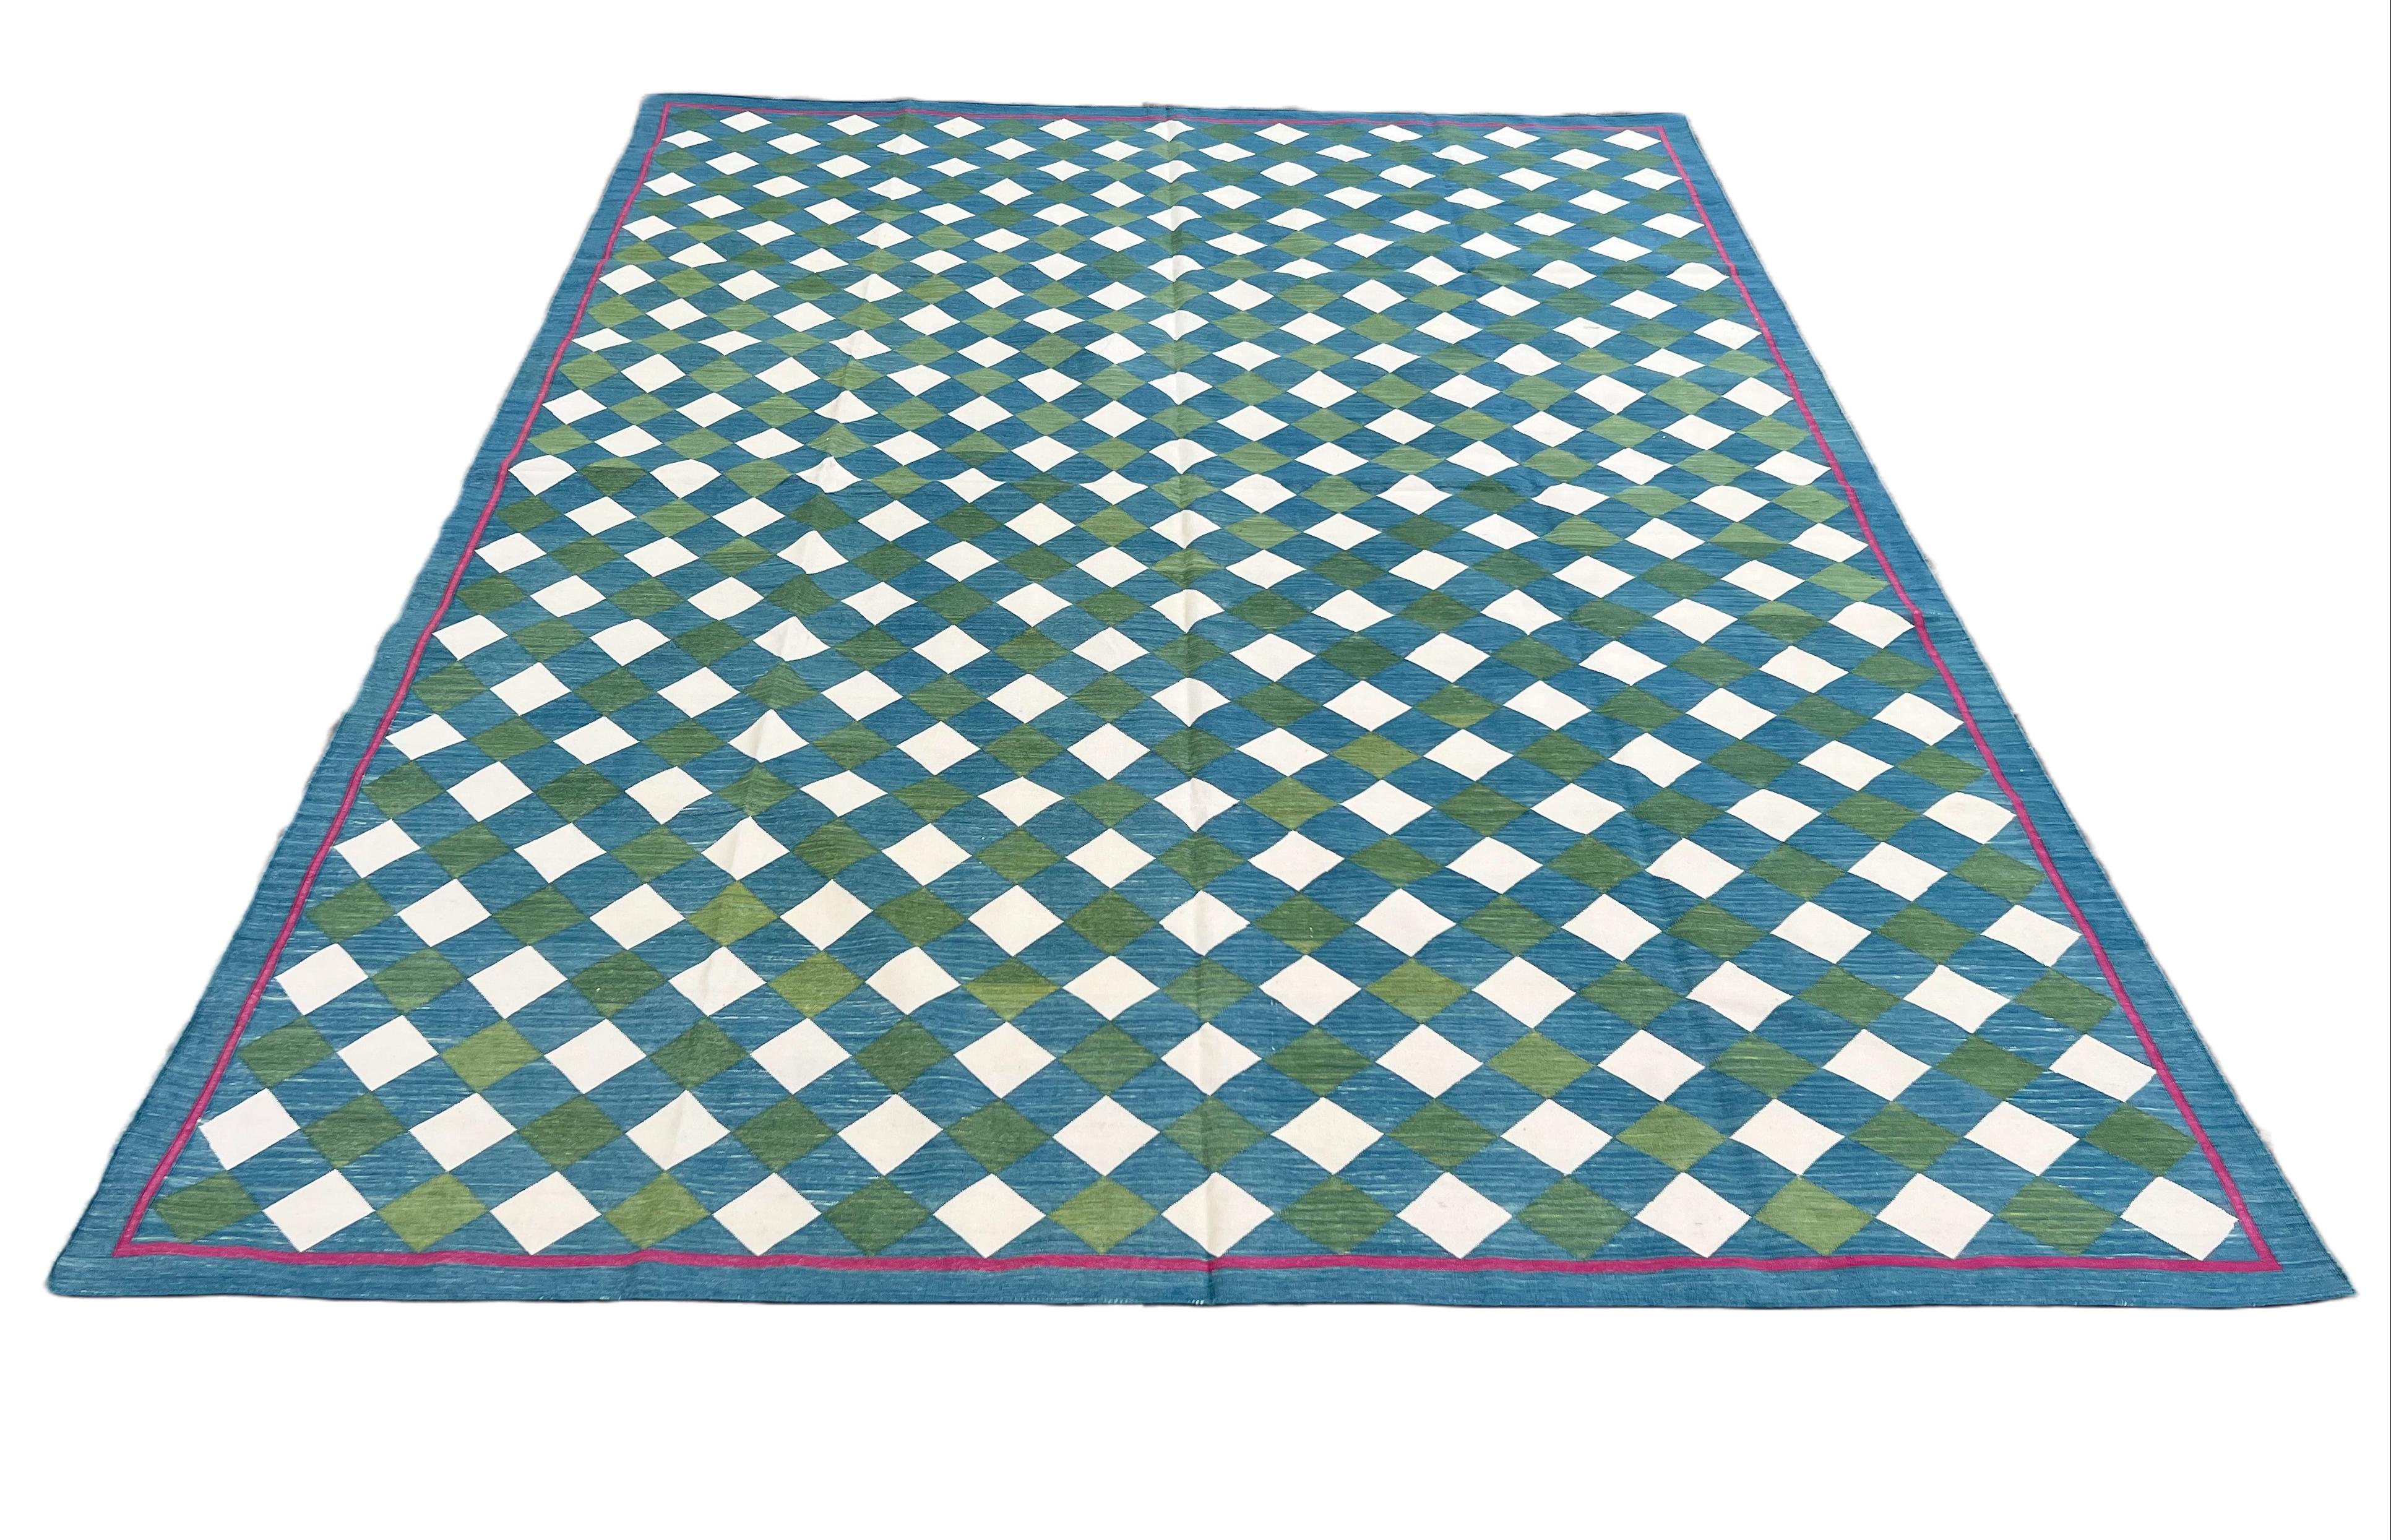 Contemporary Handmade Cotton Area Flat Weave Rug, Teal Blue, Green Checked Indian Dhurrie Rug For Sale